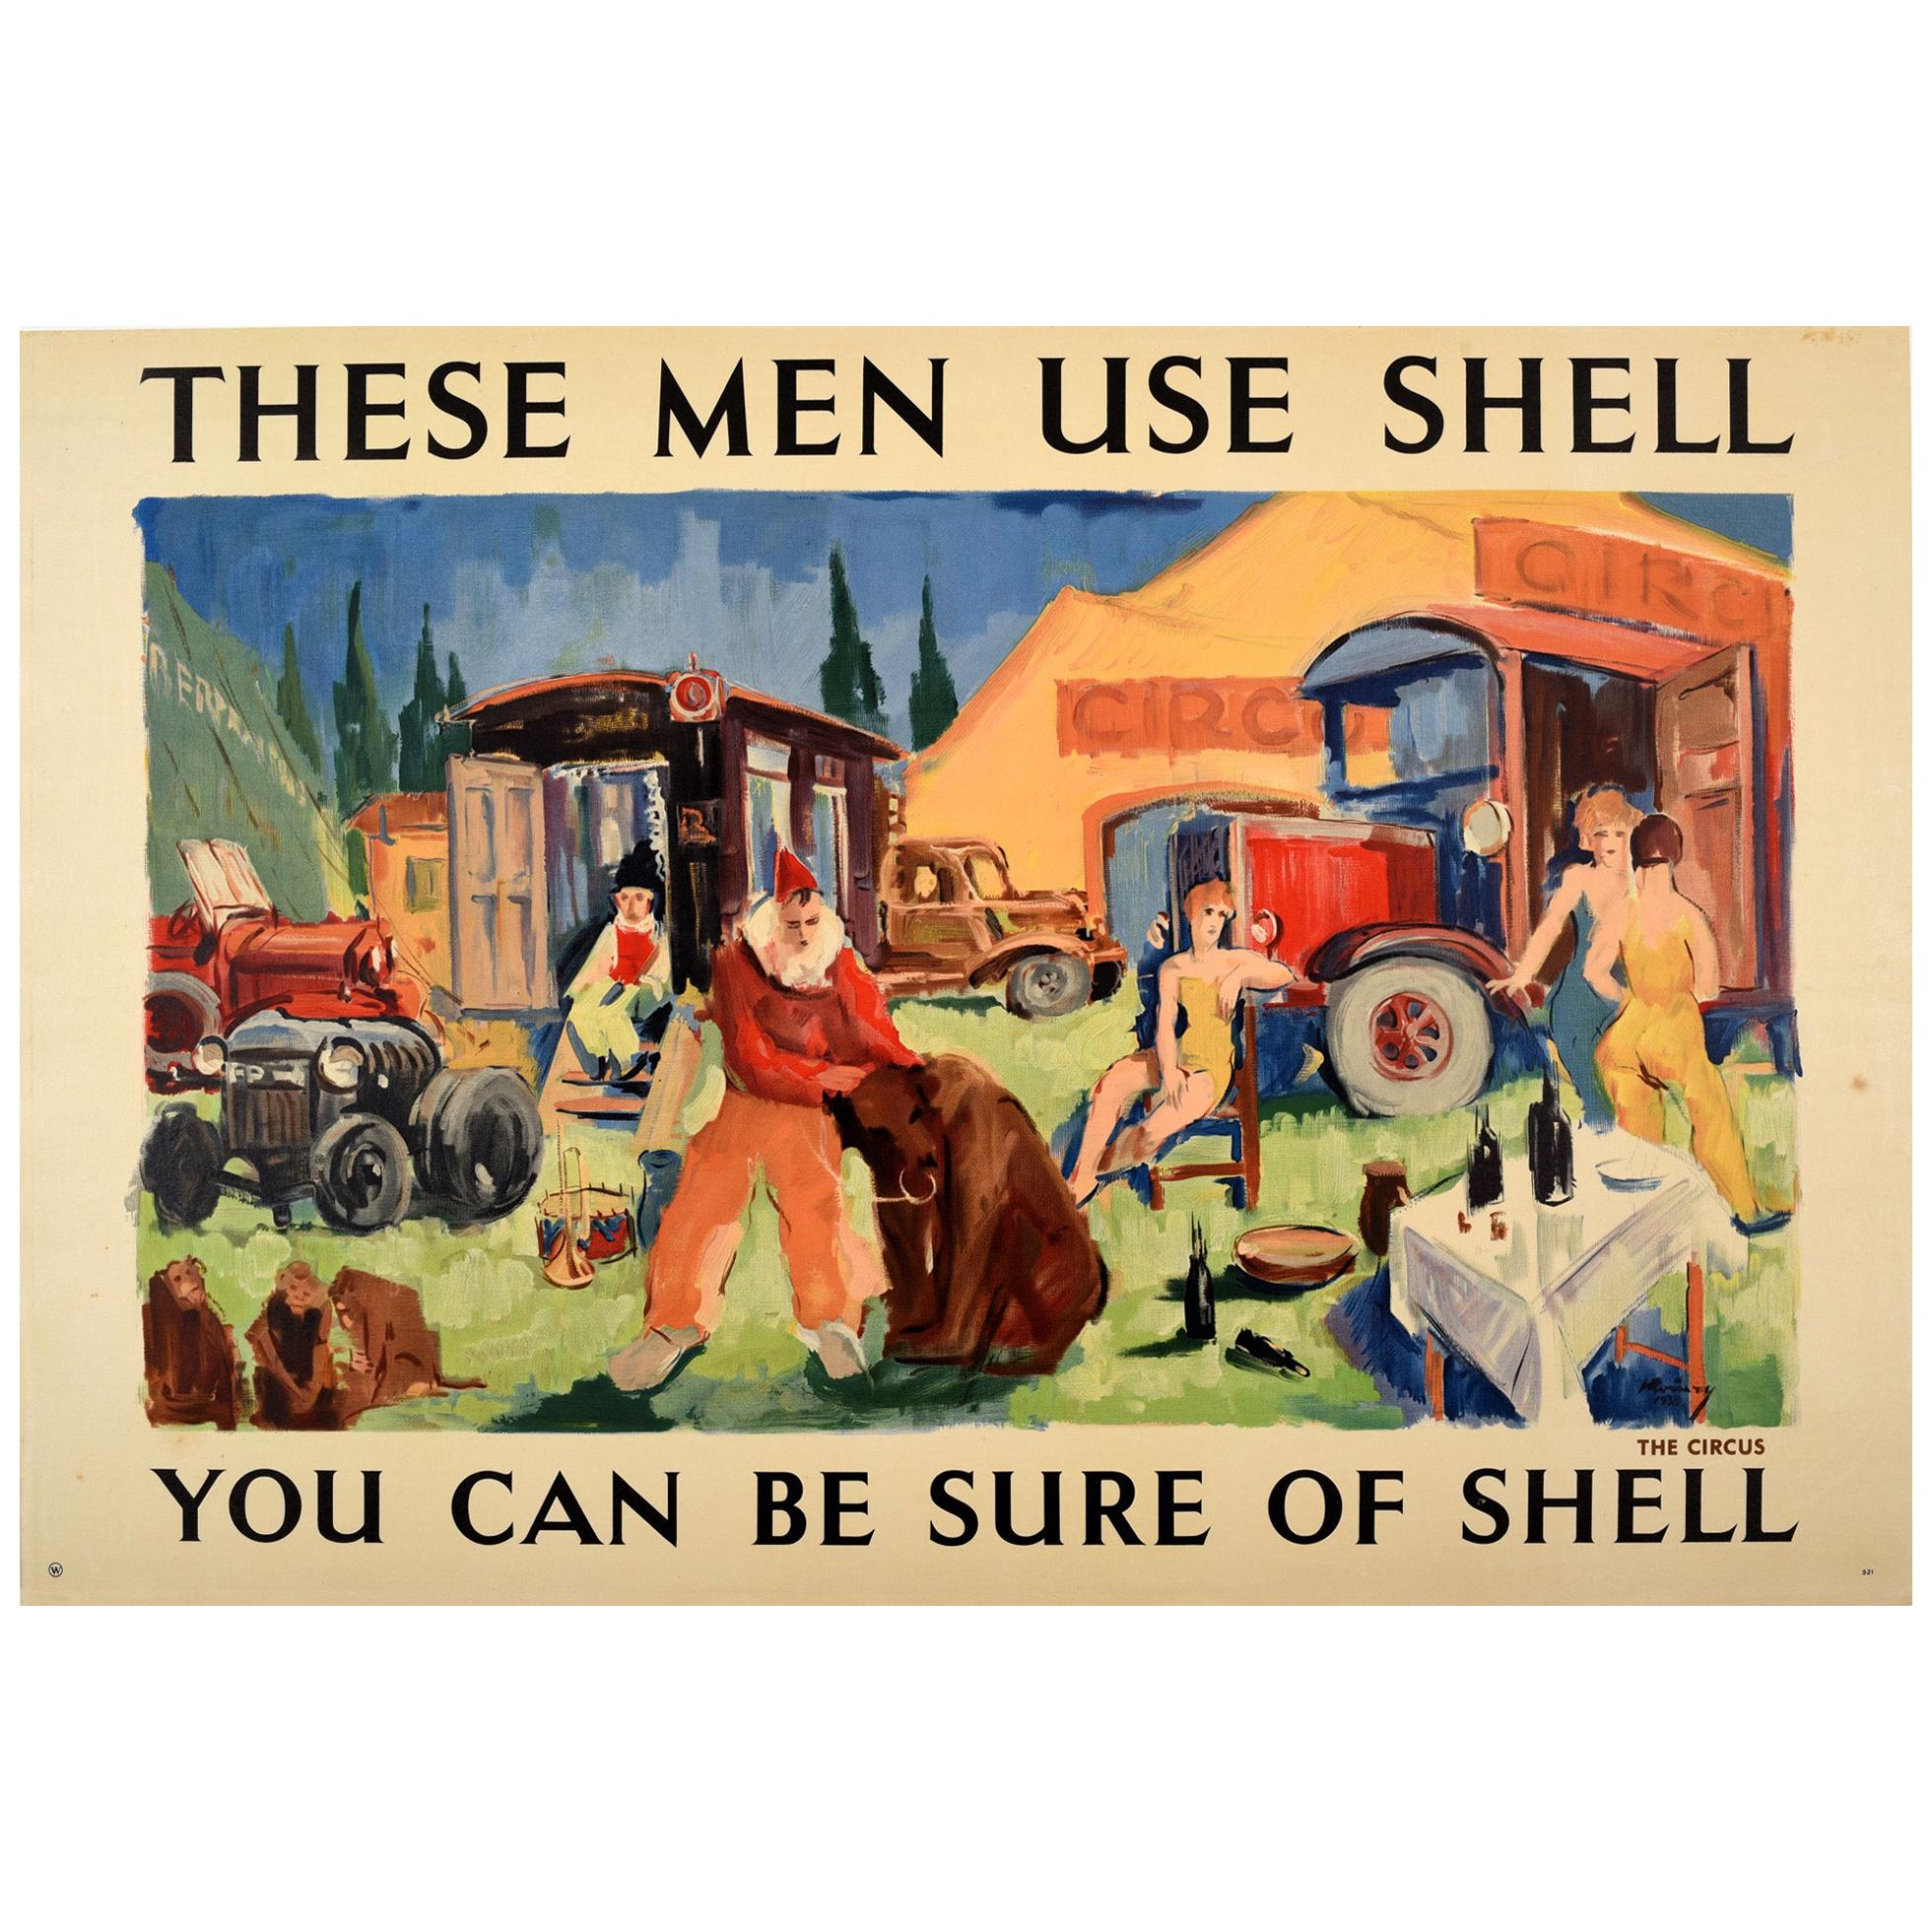 Original Vintage Poster The Circus These Men Use Shell You Can Be Sure Of Shell